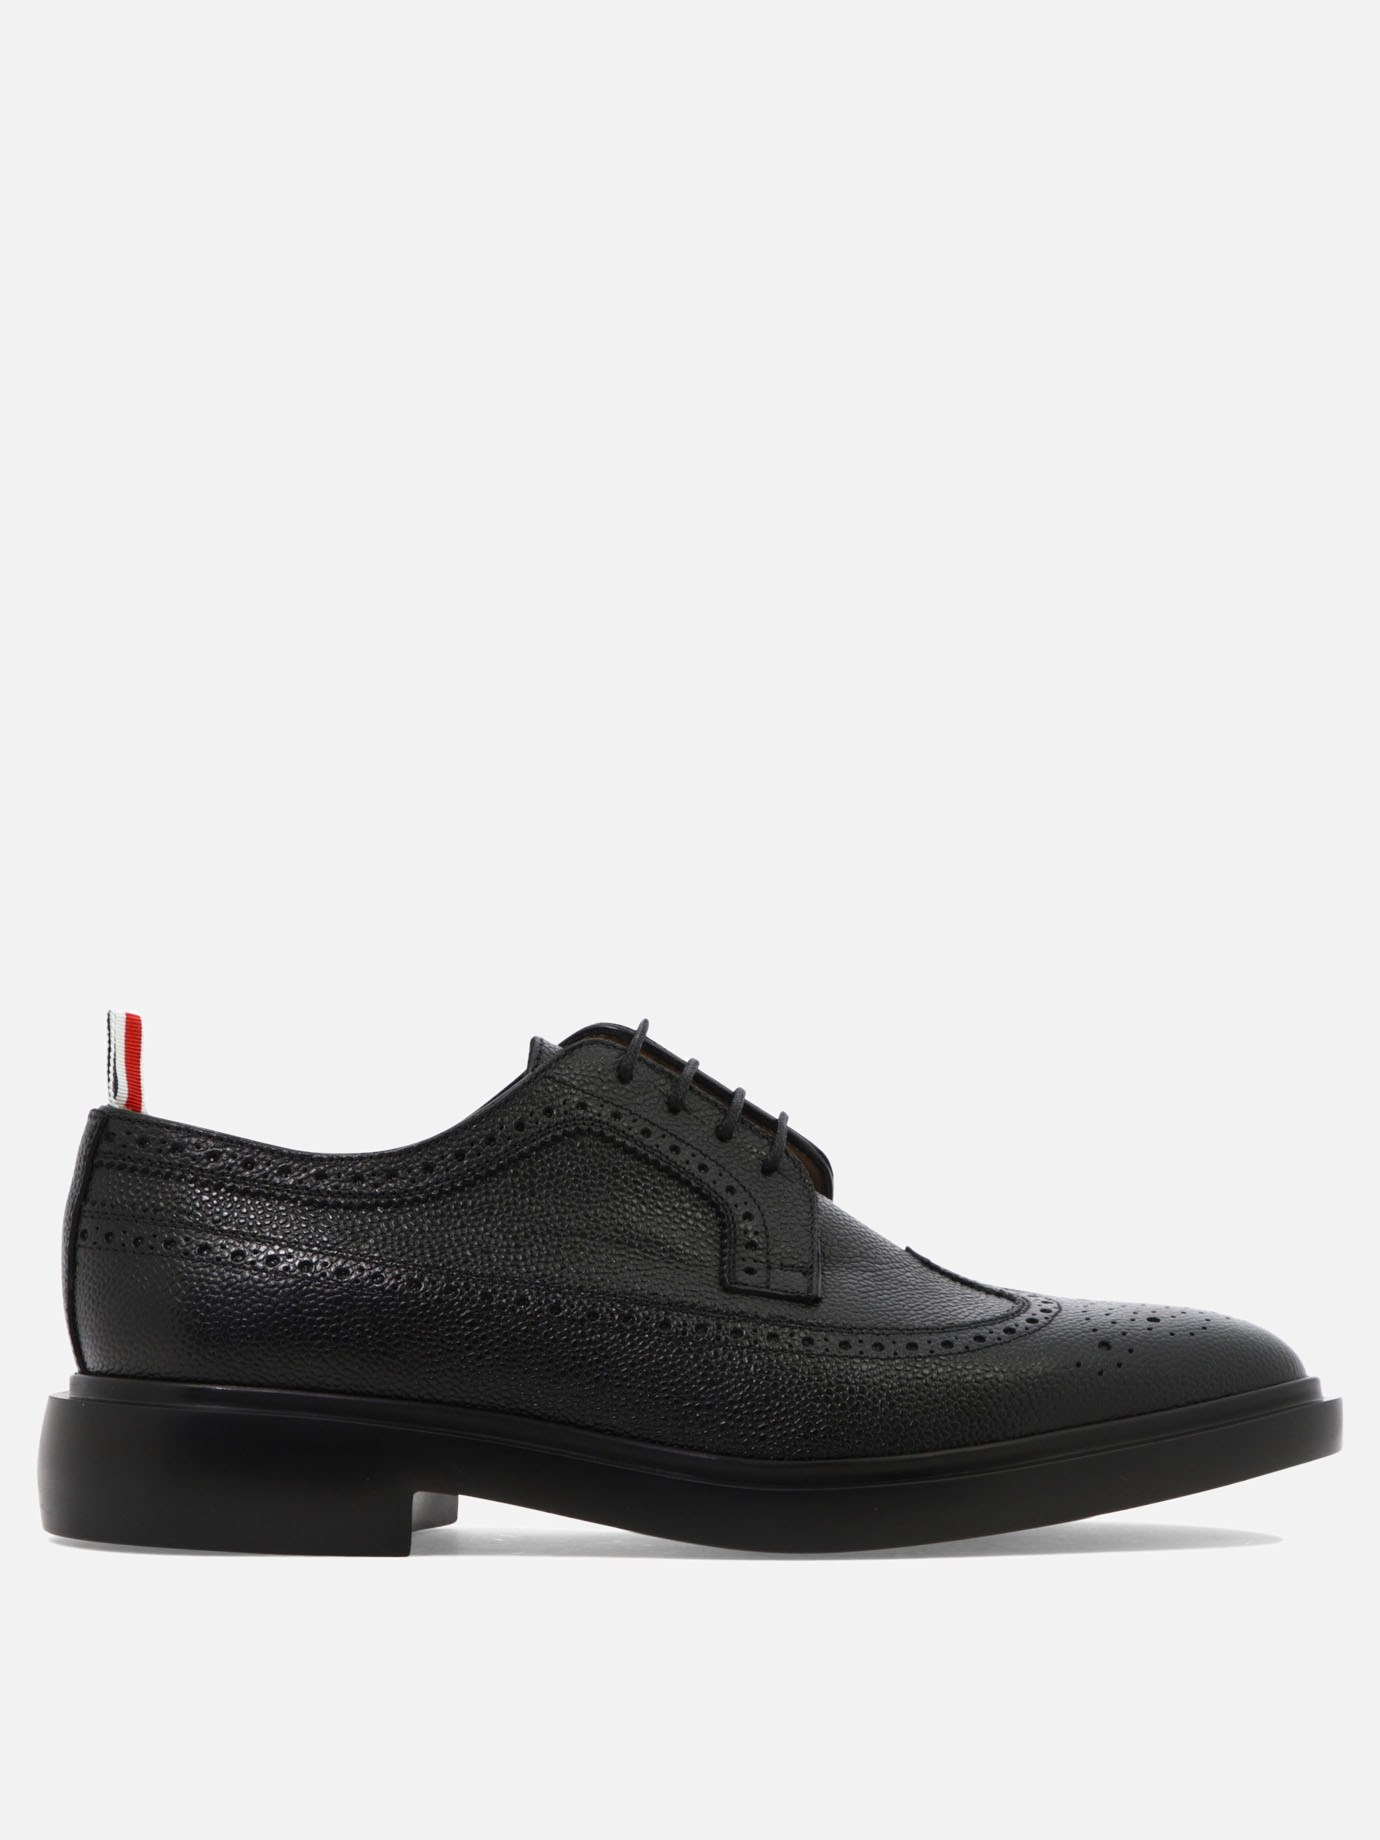  Classic Longwing  lace-up shoesby Thom Browne - 1